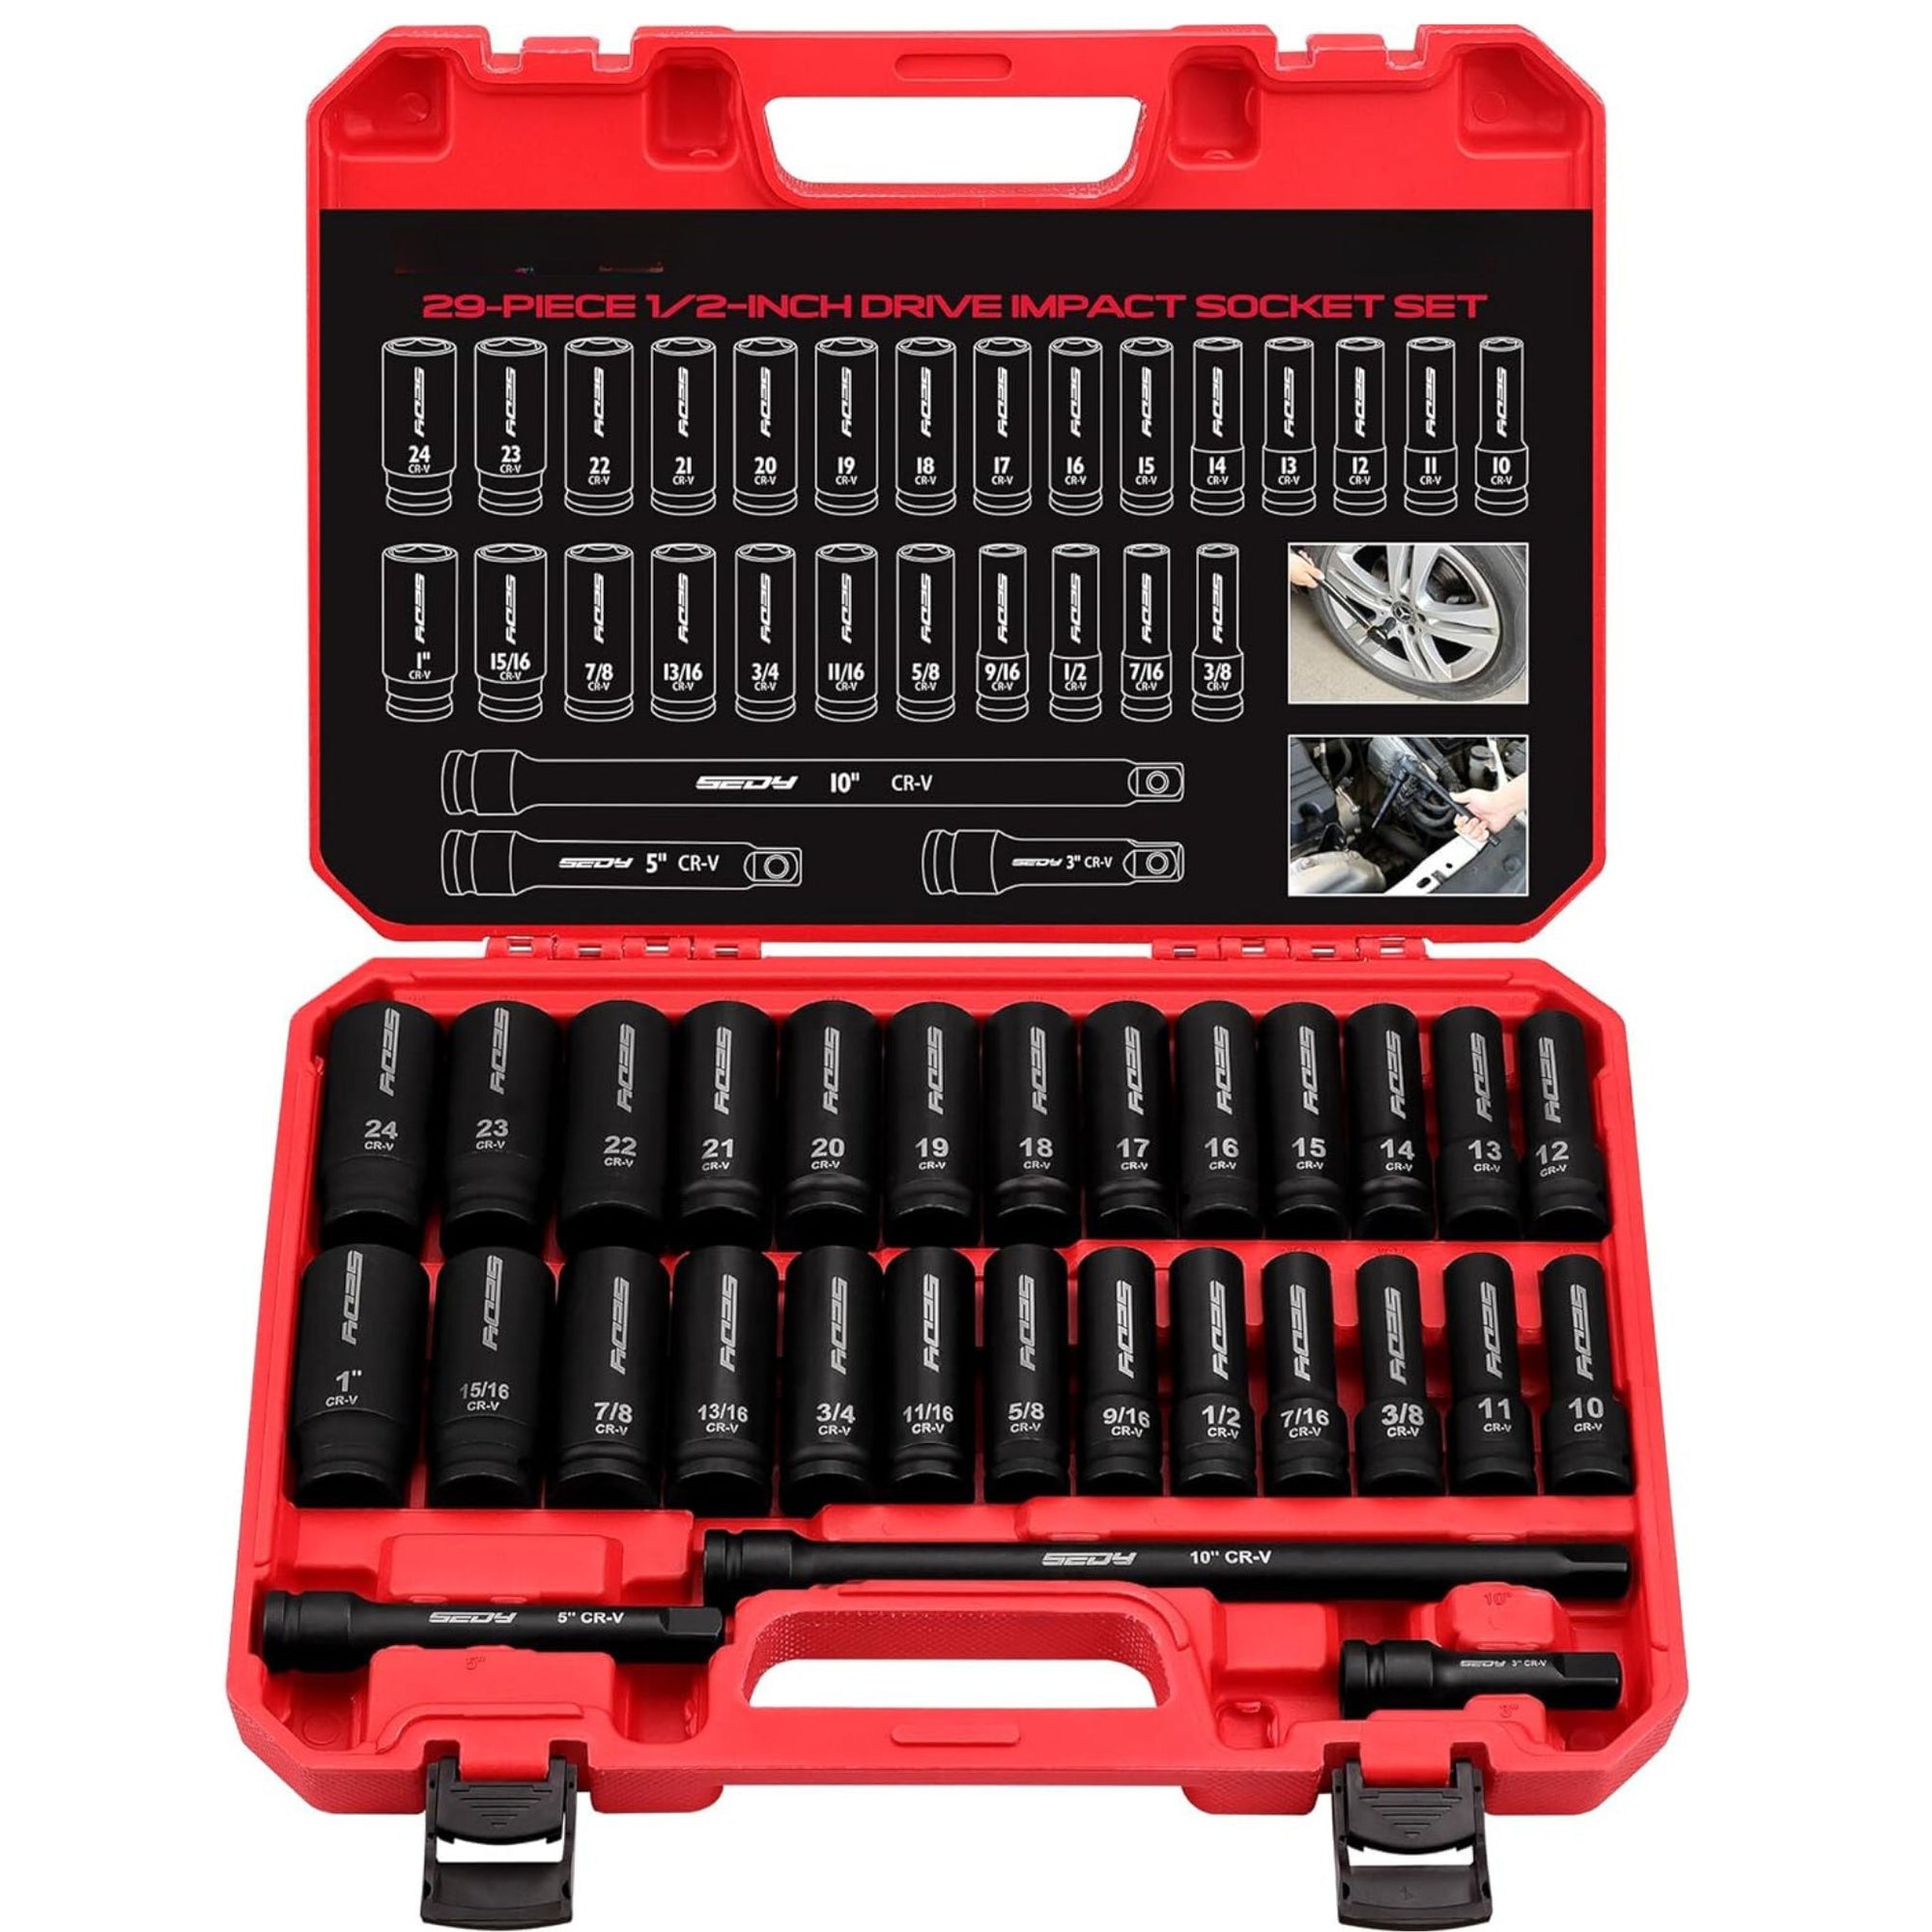 1/2" Drive Impact Socket Set, Metric & Imperial 29 Pieces - South East Clearance Centre